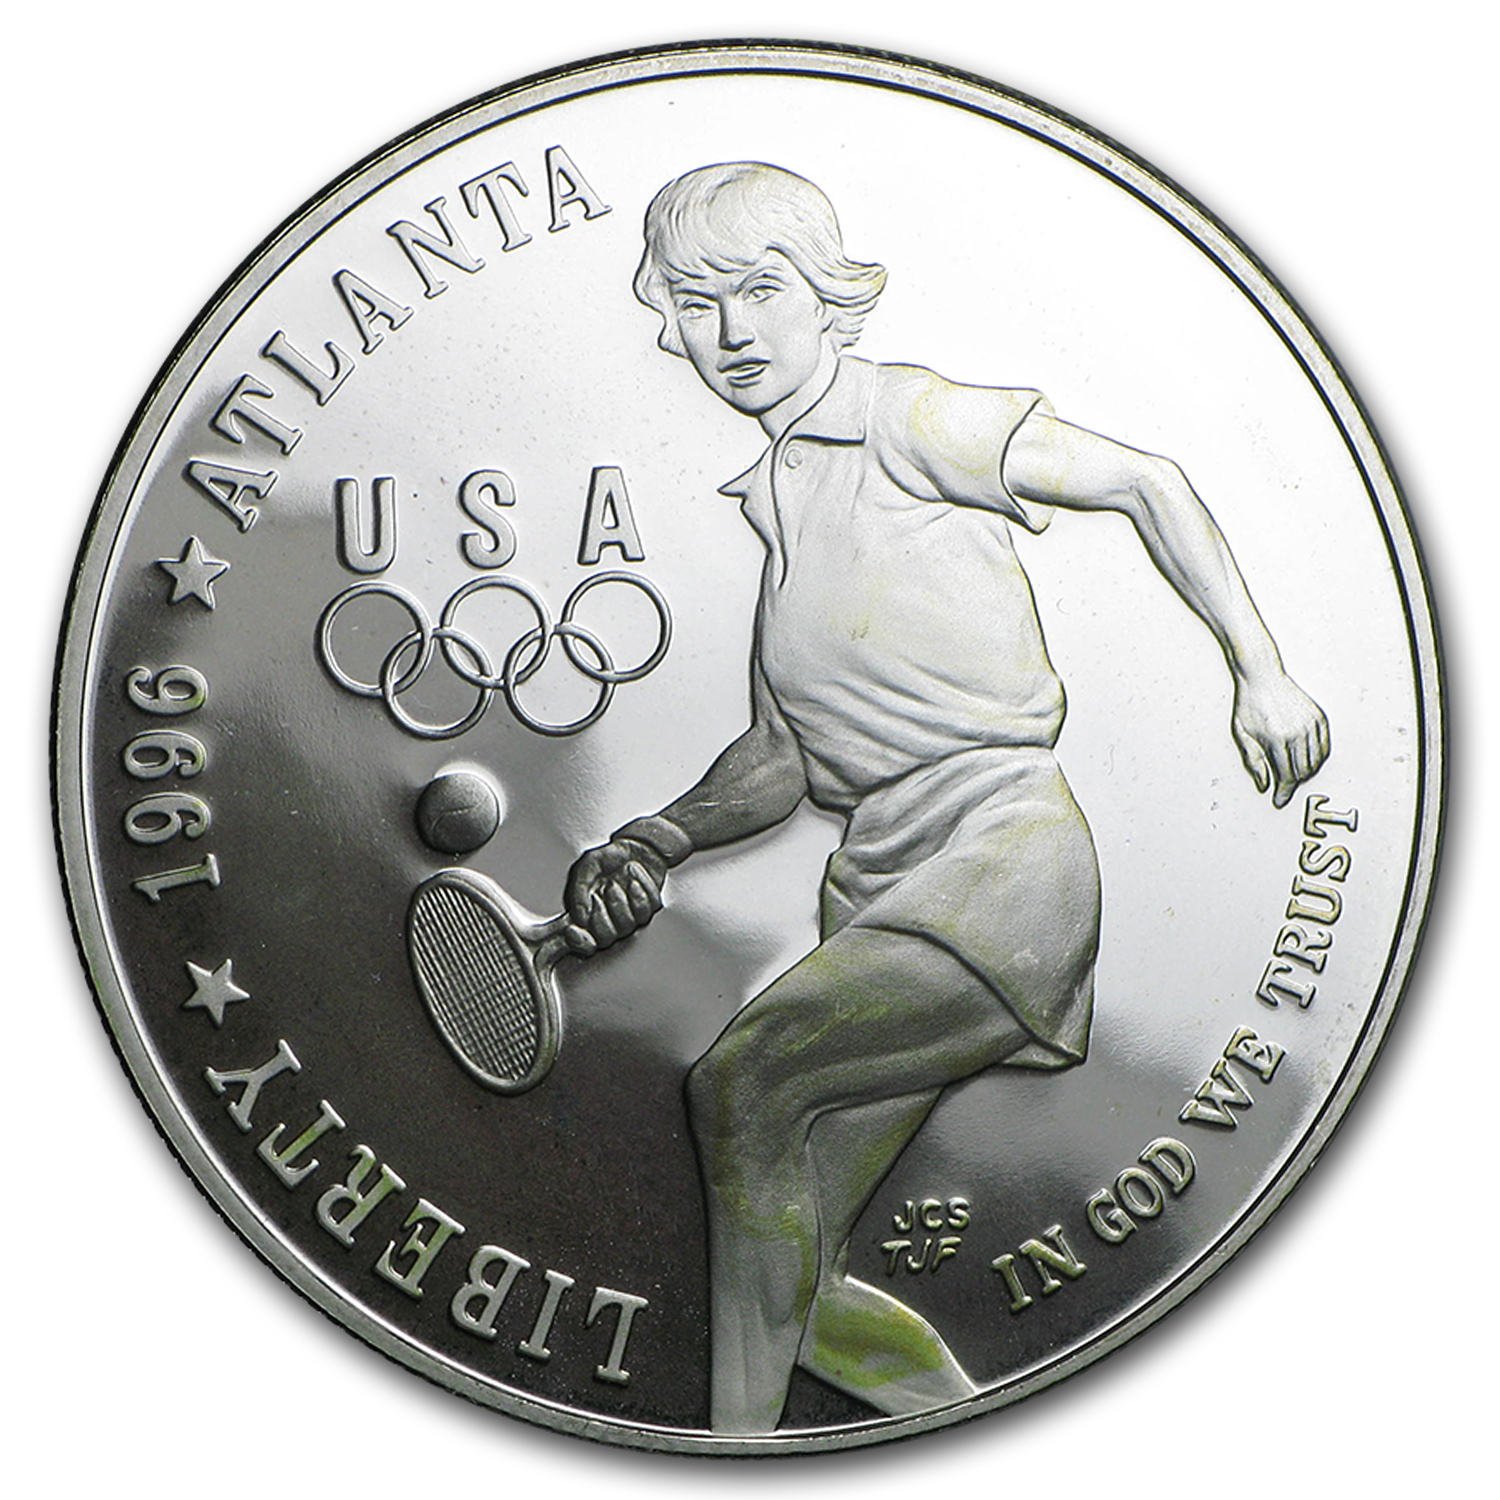 Buy 1996-P Olympic Tennis $1 Silver Commem Proof (Capsule Only)